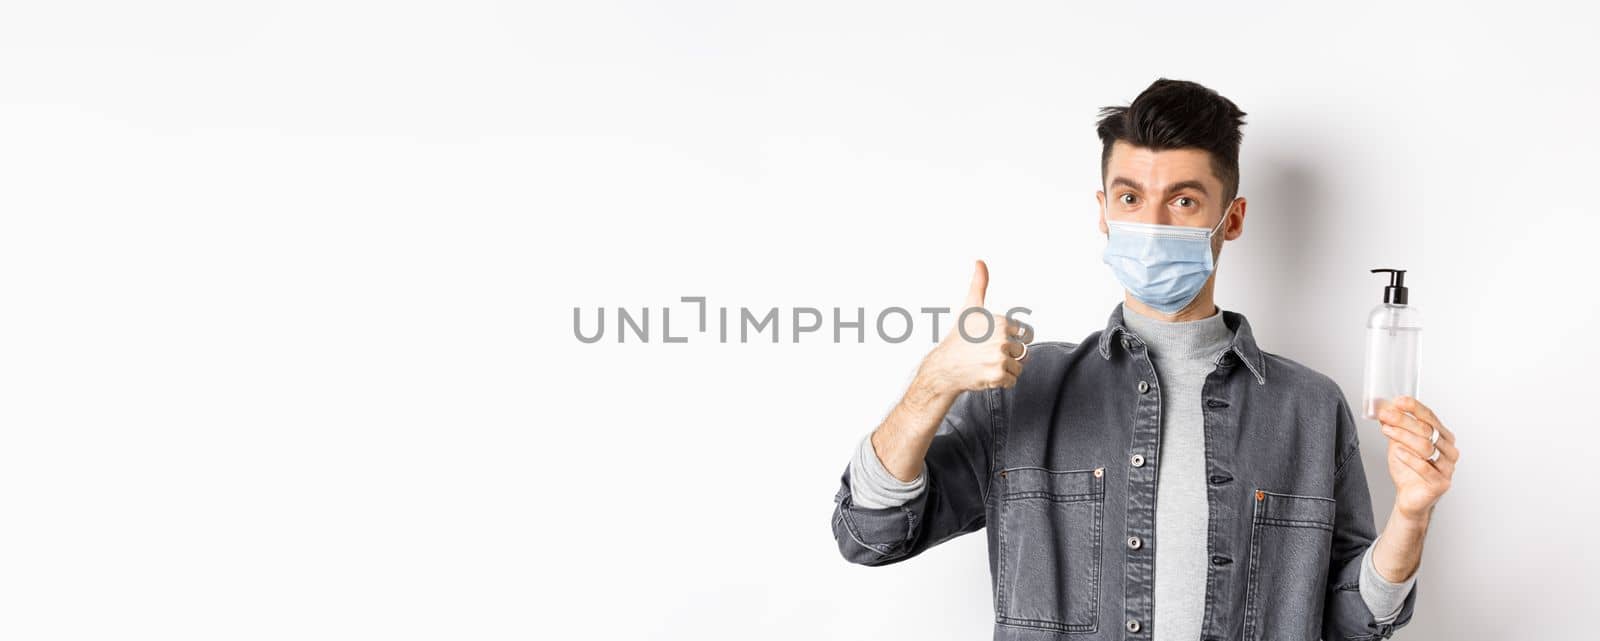 Healthy people and covid-19 concept. Excited man in sterile medical mask holding bottle of good hand sanitizer, show thumb up, recommend antiseptic, standing against white background.